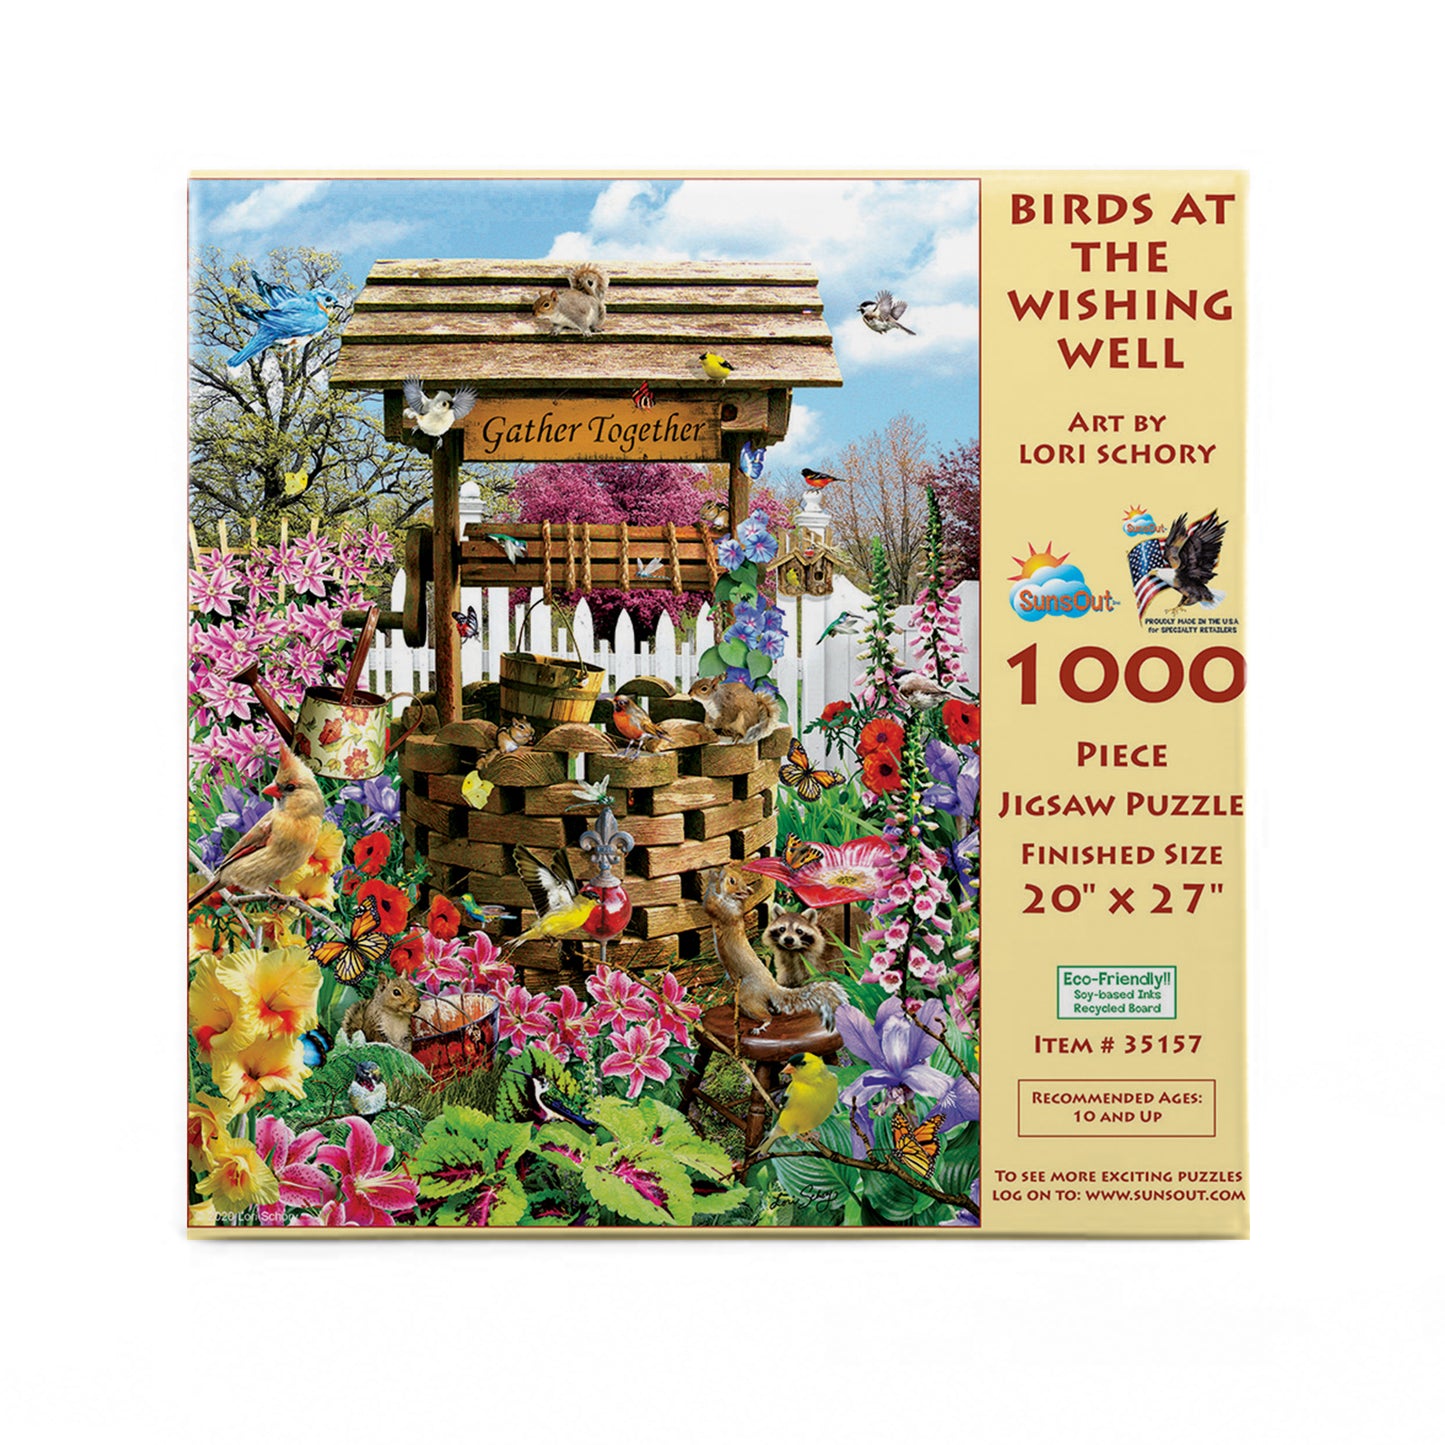 Birds at the Wishing Well - 1000 Piece Jigsaw Puzzle